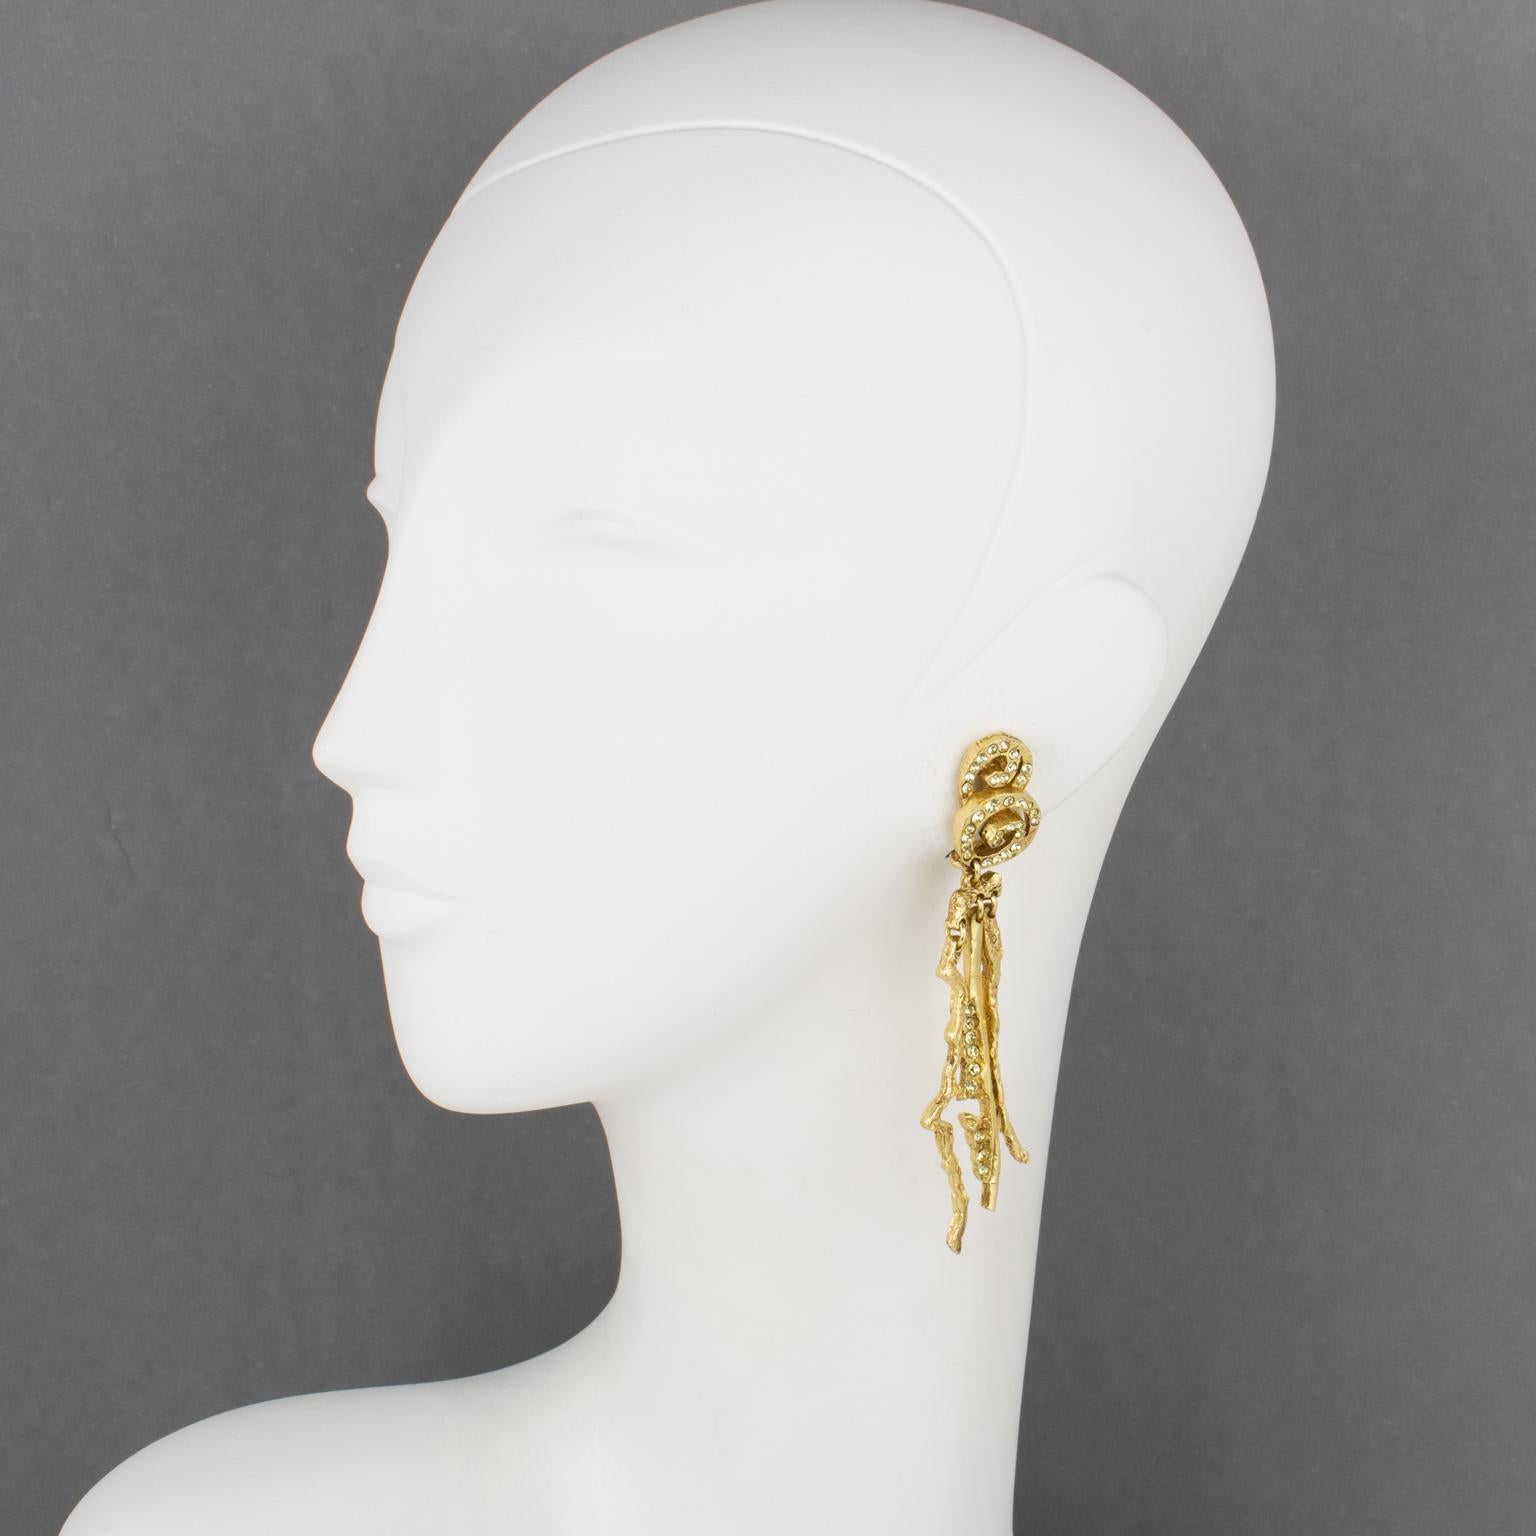 These superb Christian Lacroix Paris futuristic clip-on earrings feature a long dimensional brutalist dangling shape, with gilded metal all carved, textured, and see-thru, complimented with yellow champagne crystal rhinestones. Each piece is